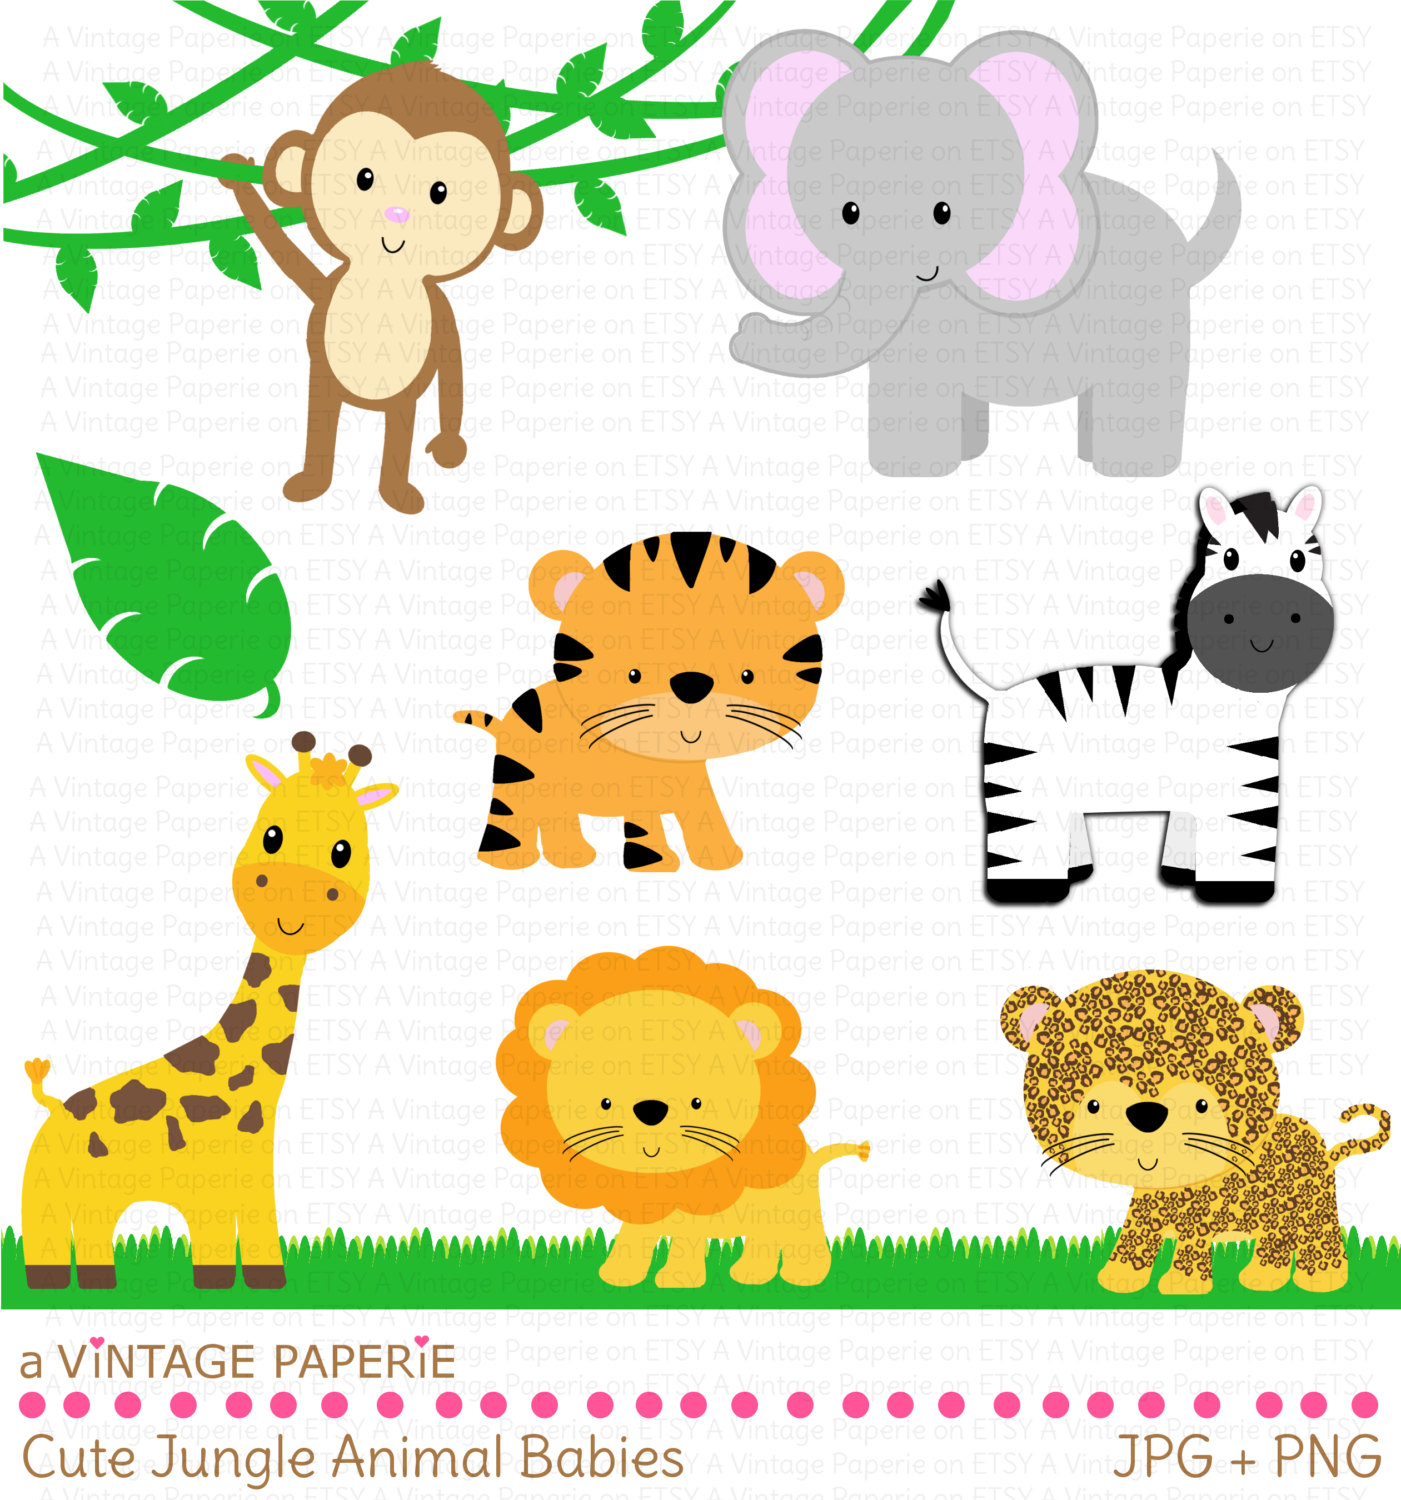 Baby animal clipart.